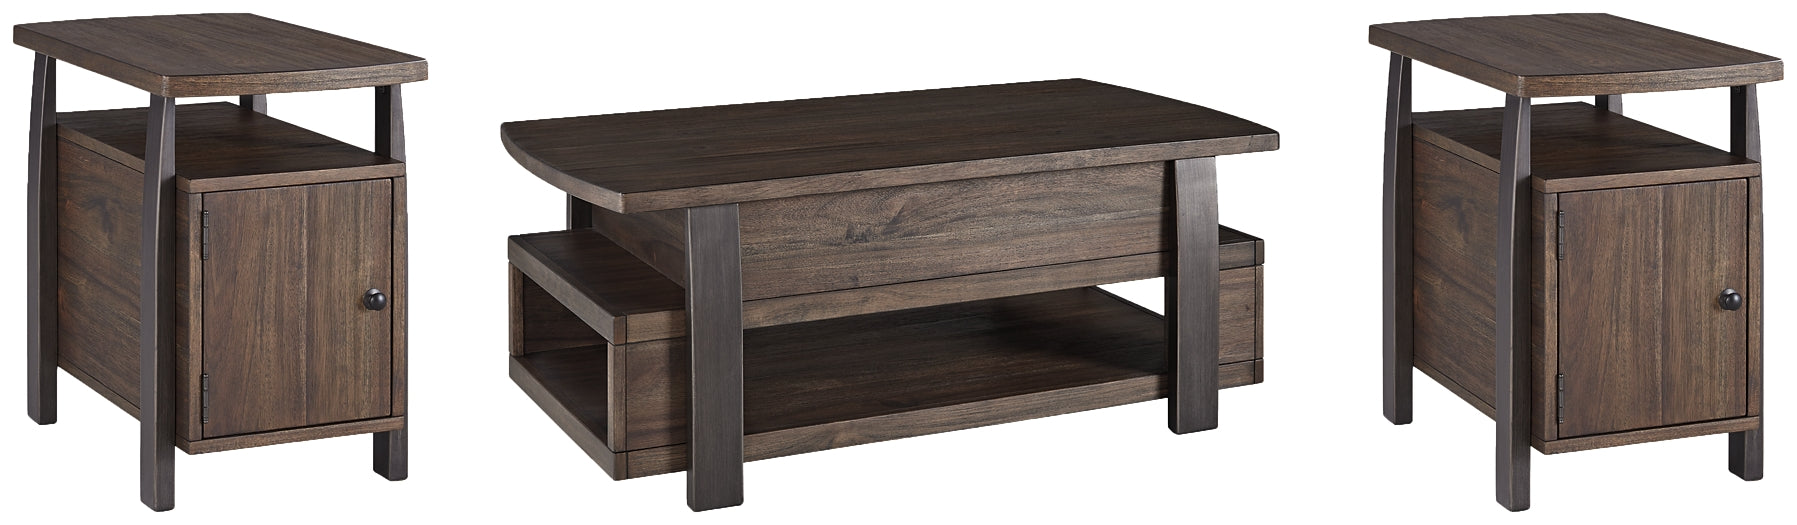 Vailbry Coffee Table with 2 End Tables Signature Design by Ashley®